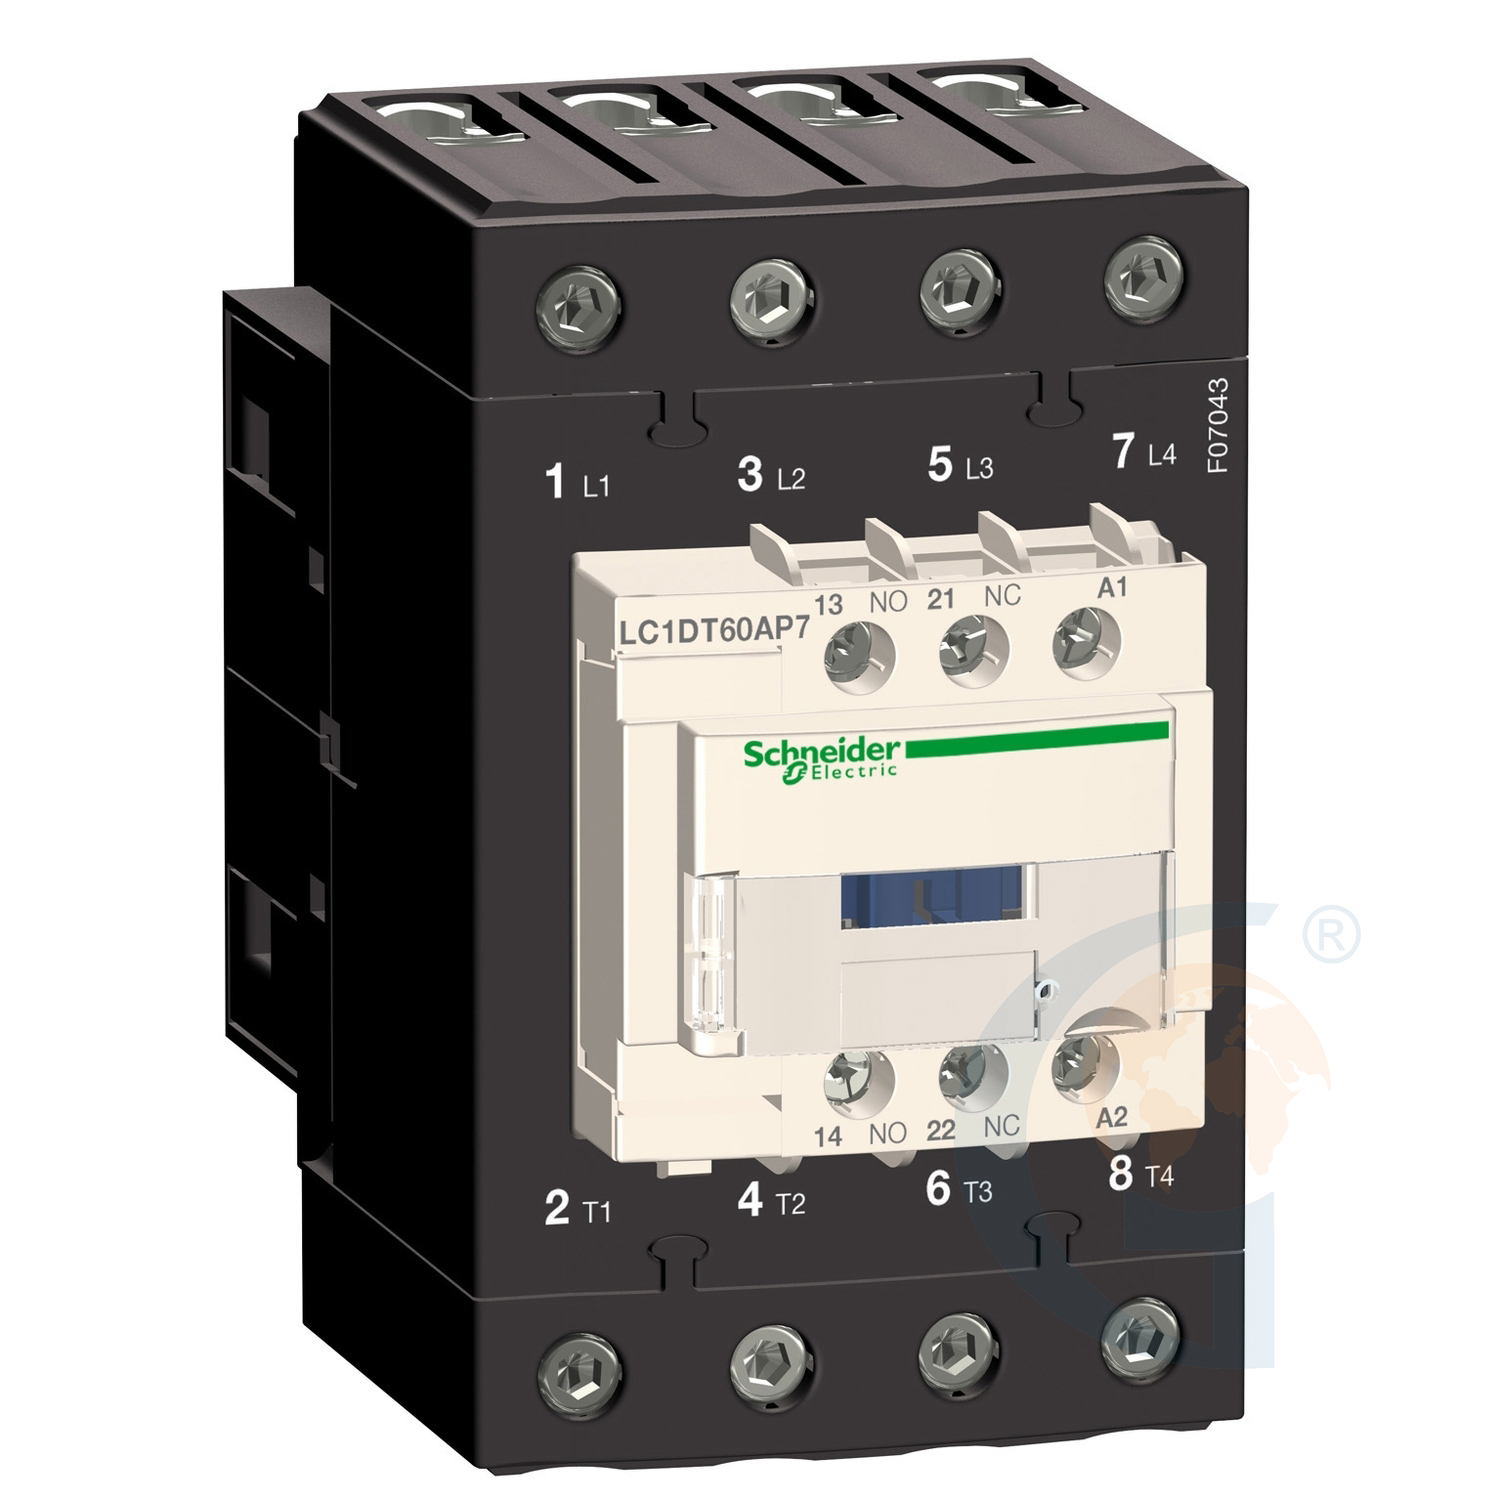 Schneider Electric LC1DT60ACD TeSys D contactor – 4P(4 NO) – AC-1 – <= 440 V 60 A - 36 V DC standard coil https://gesrepair.com/wp-content/uploads/2020/Schneider/Schneider_Electric_LC1DT60ACD_.jpg